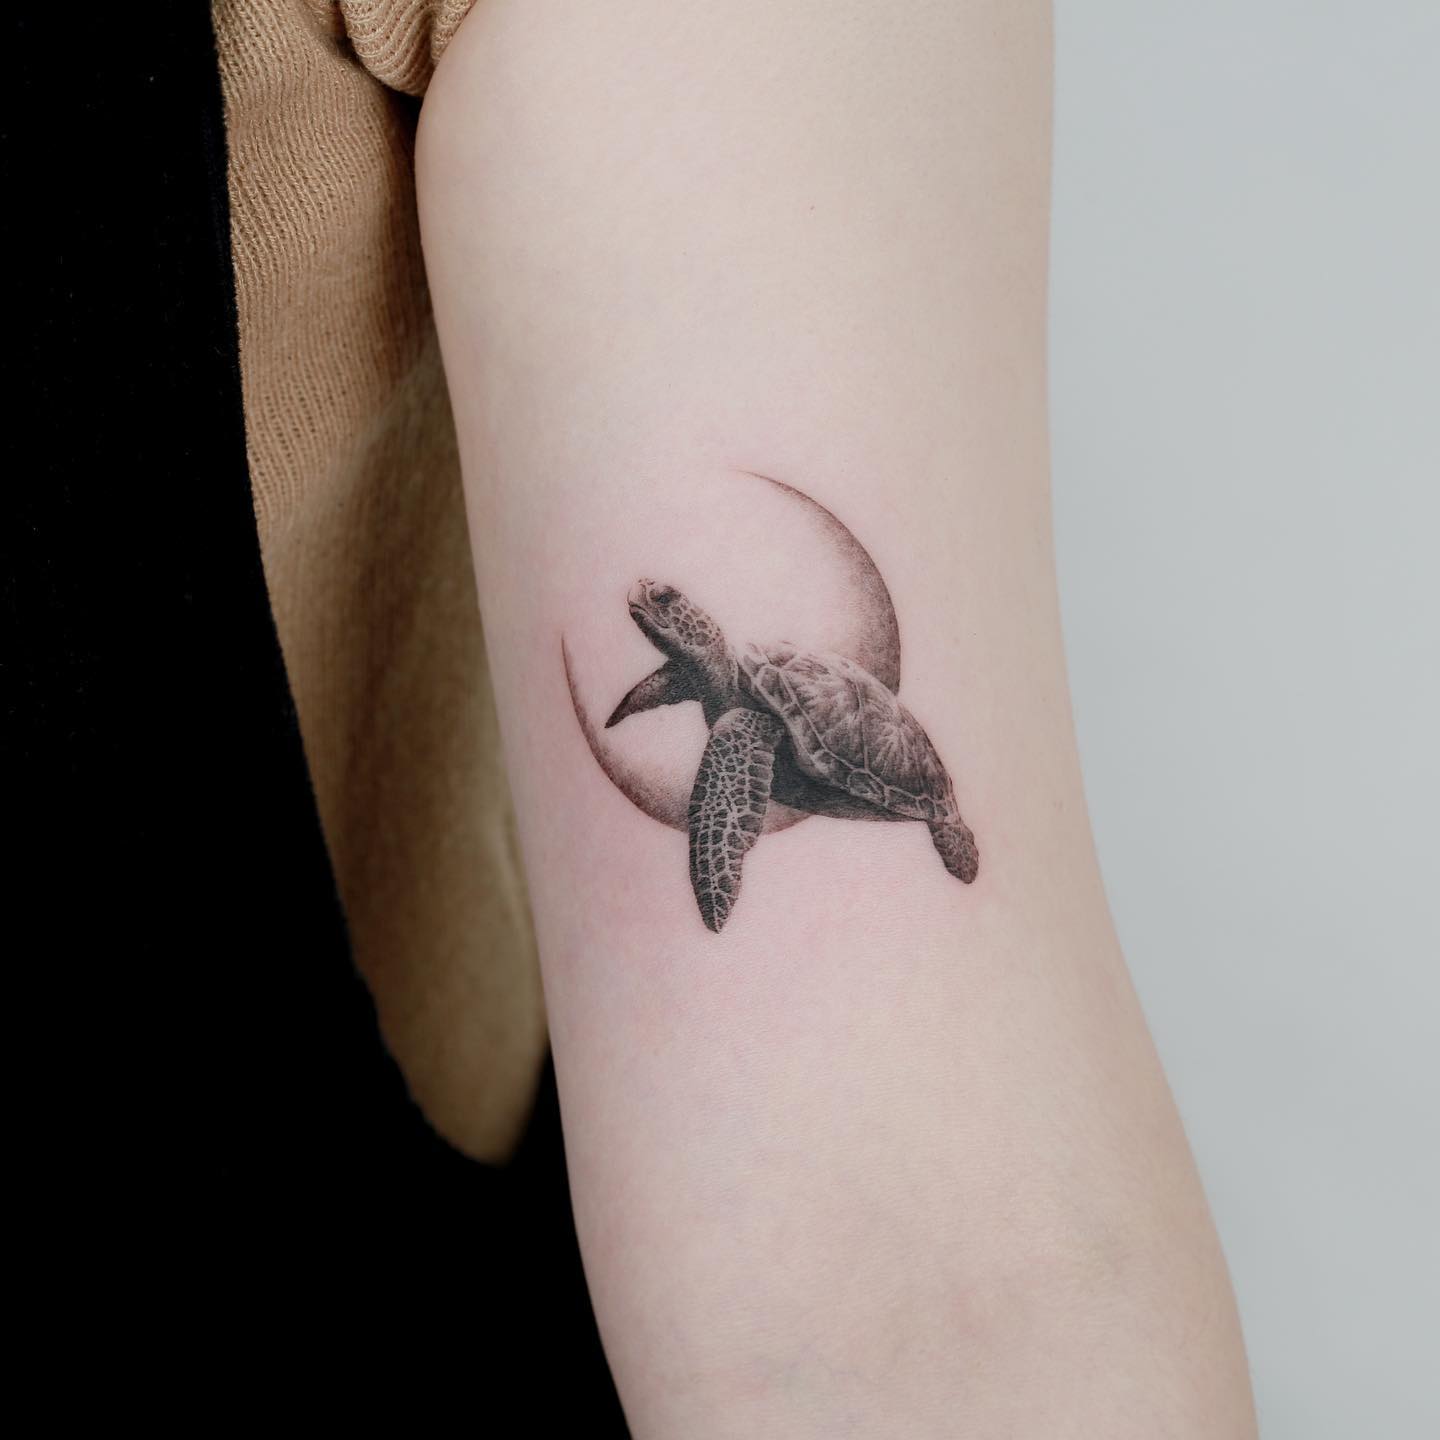 Micro-realistic turtle tattoo on the inner arm